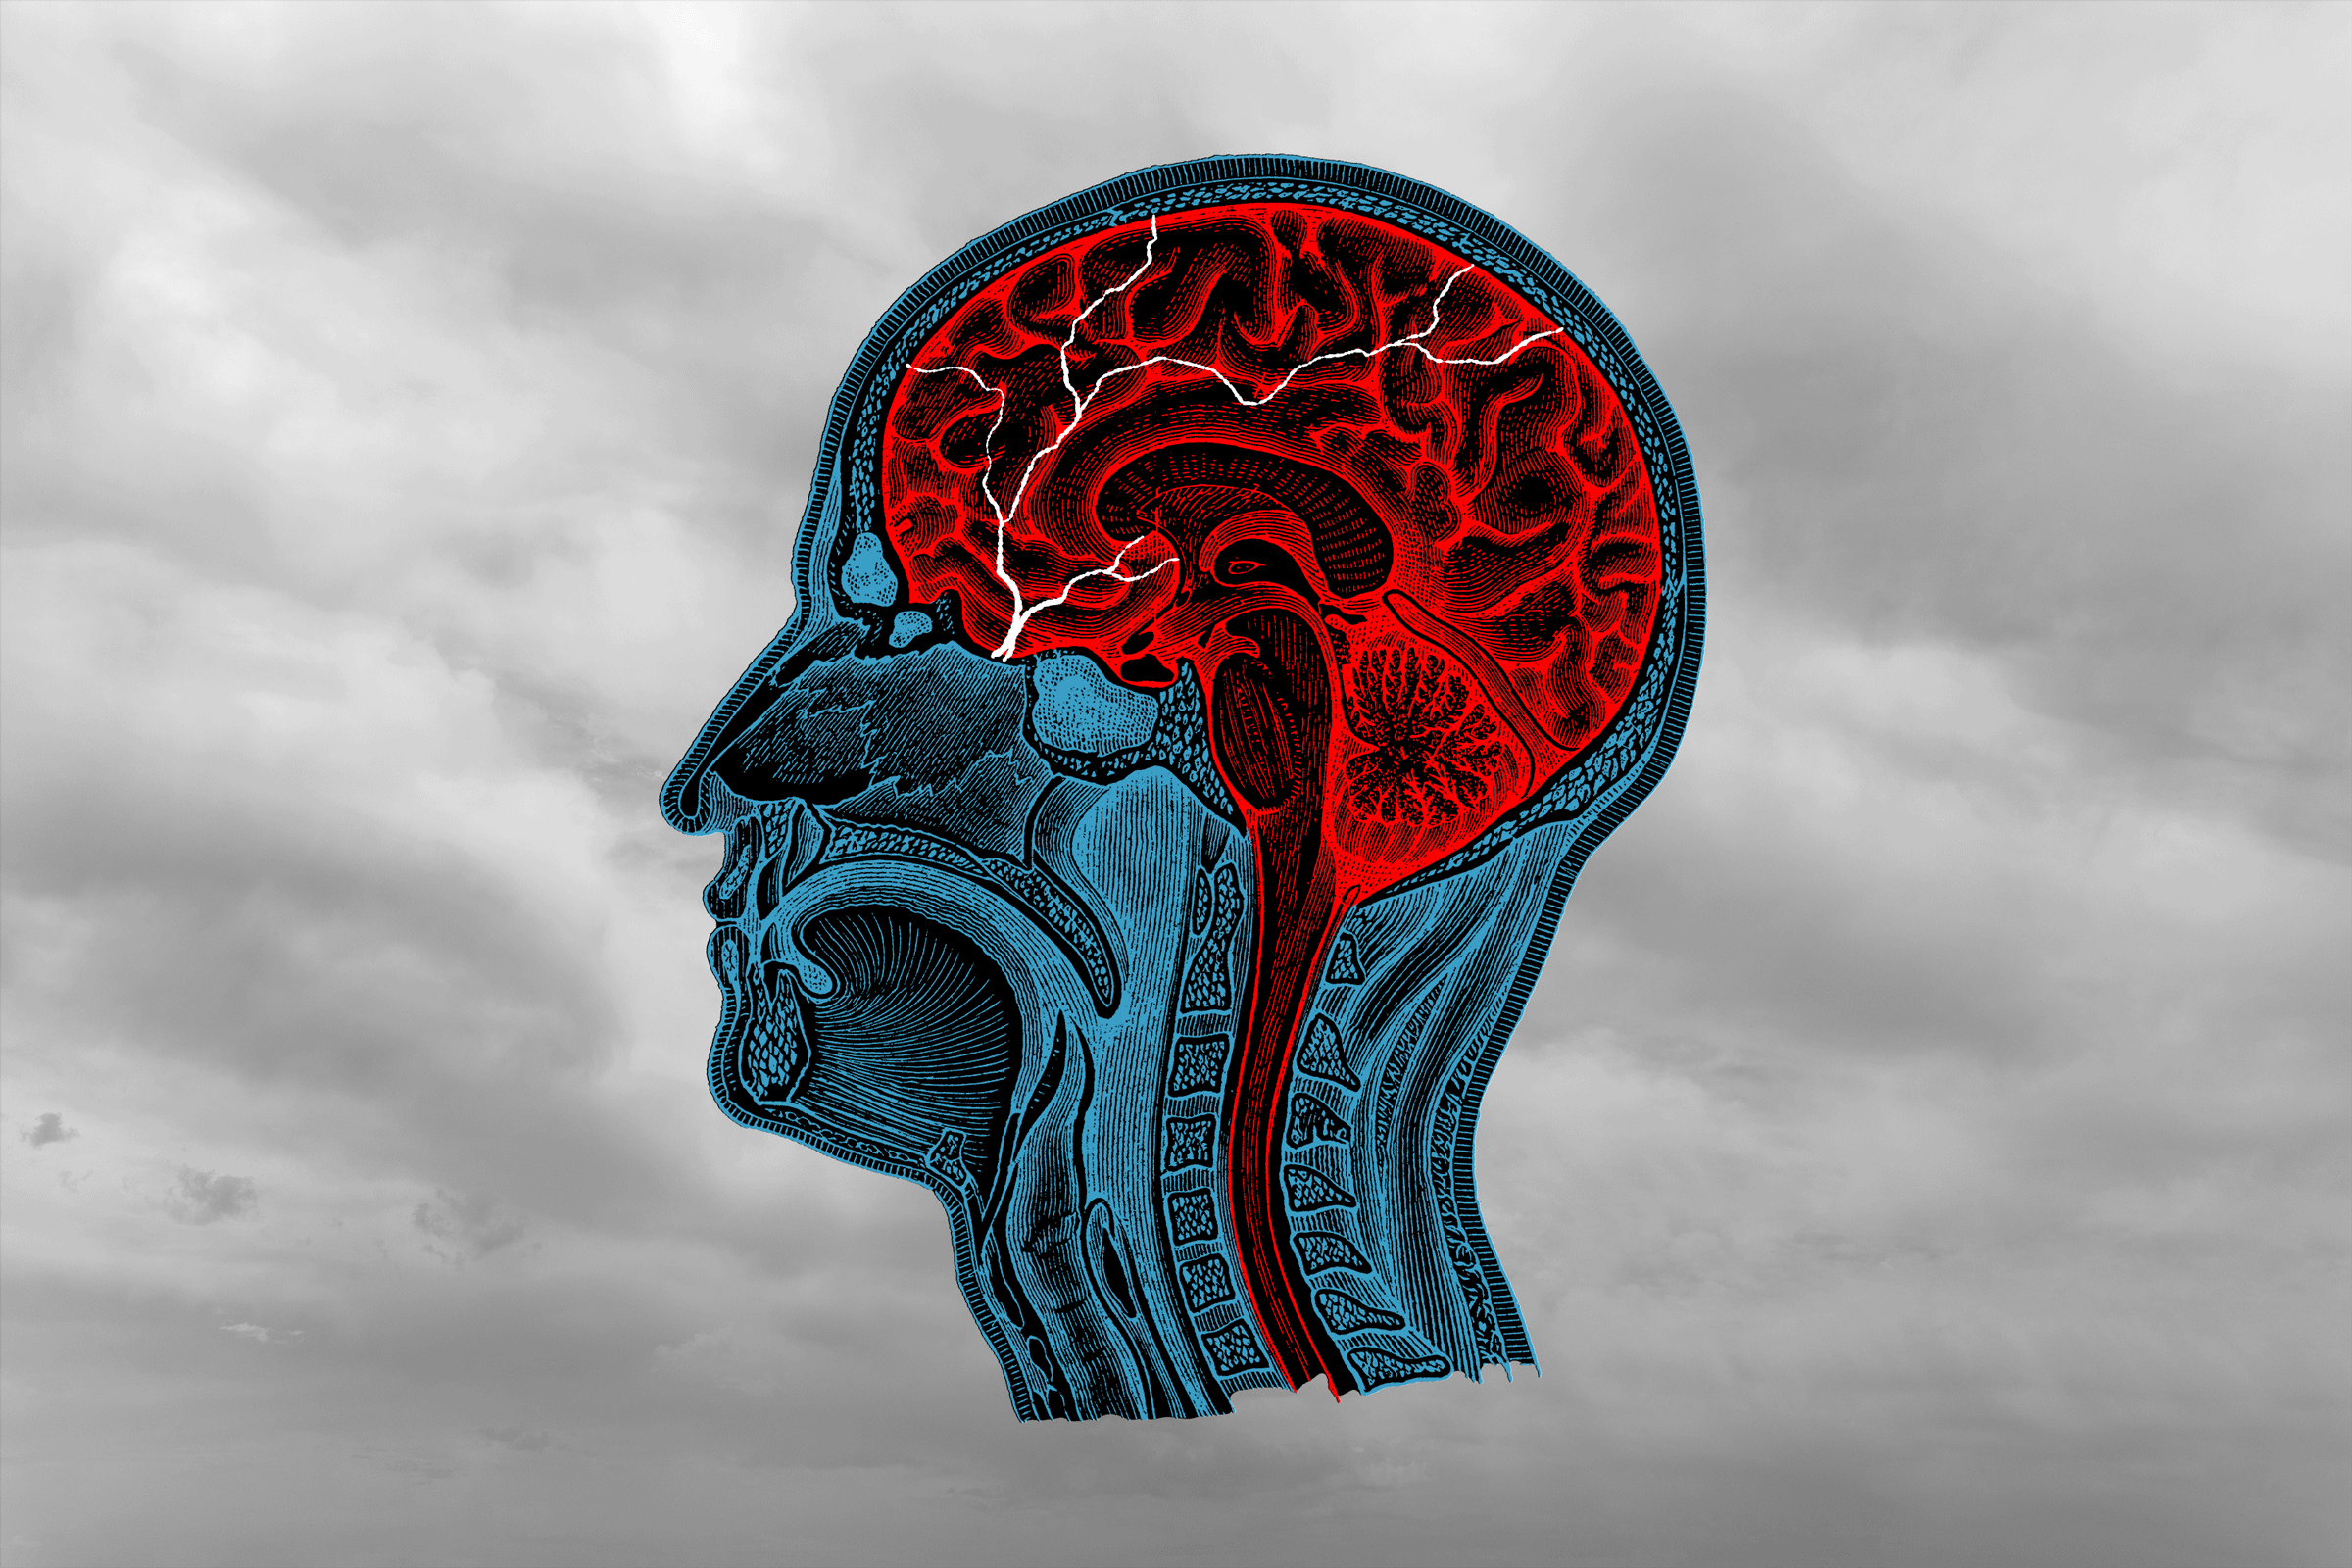 anatomical head engraving with animated lighting in the brain on a cloudy sky background